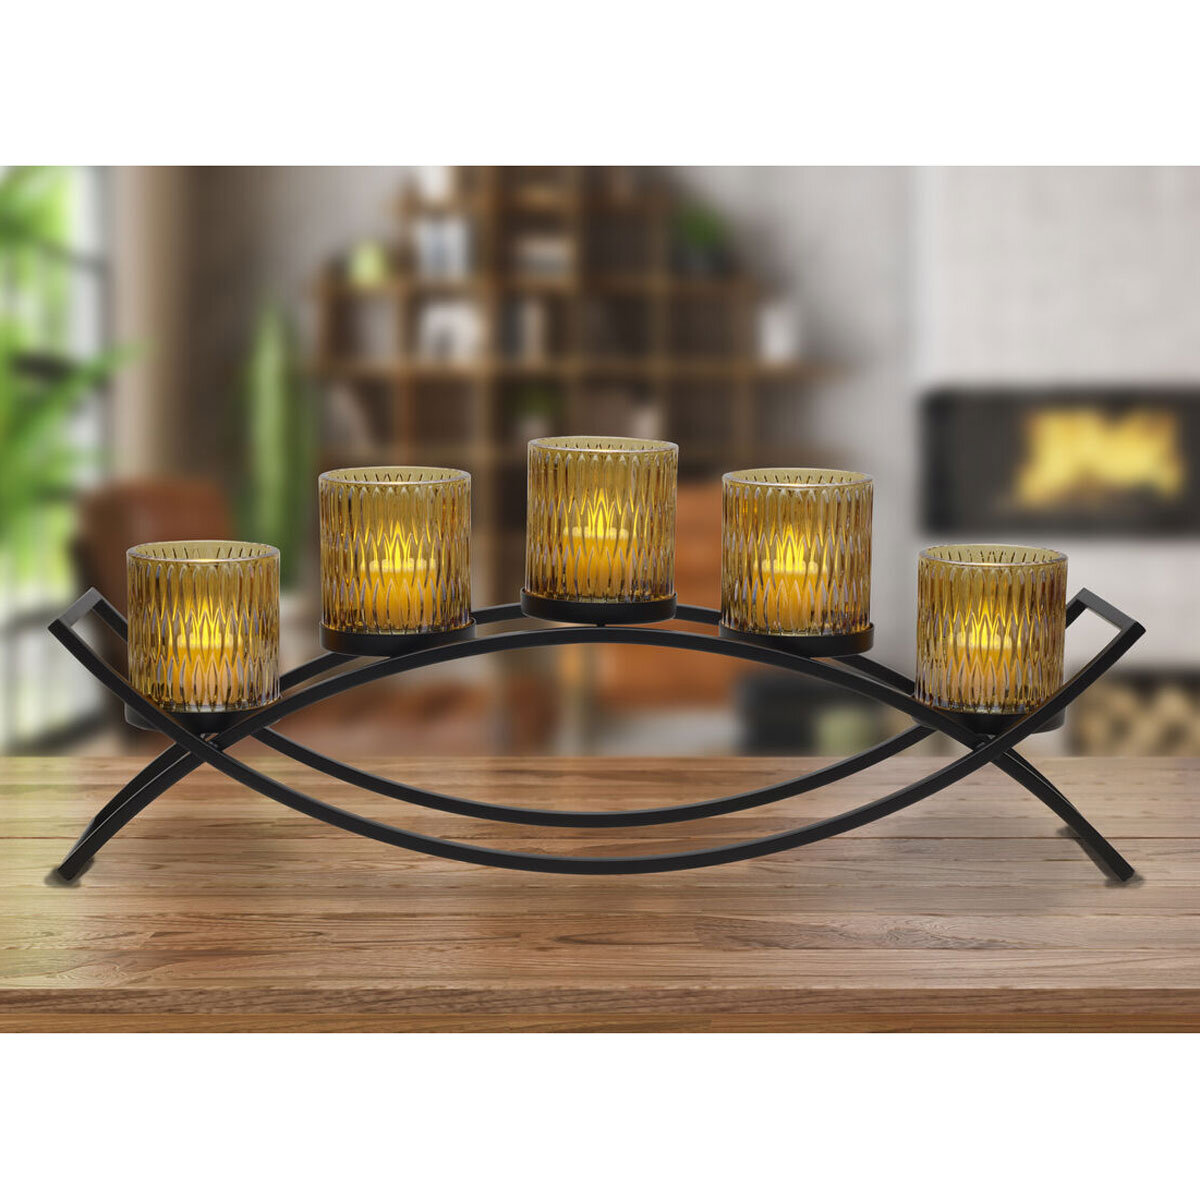 Mikasa Double Arch Centrepiece with 5 Glass Candle Holders in Amber Glass